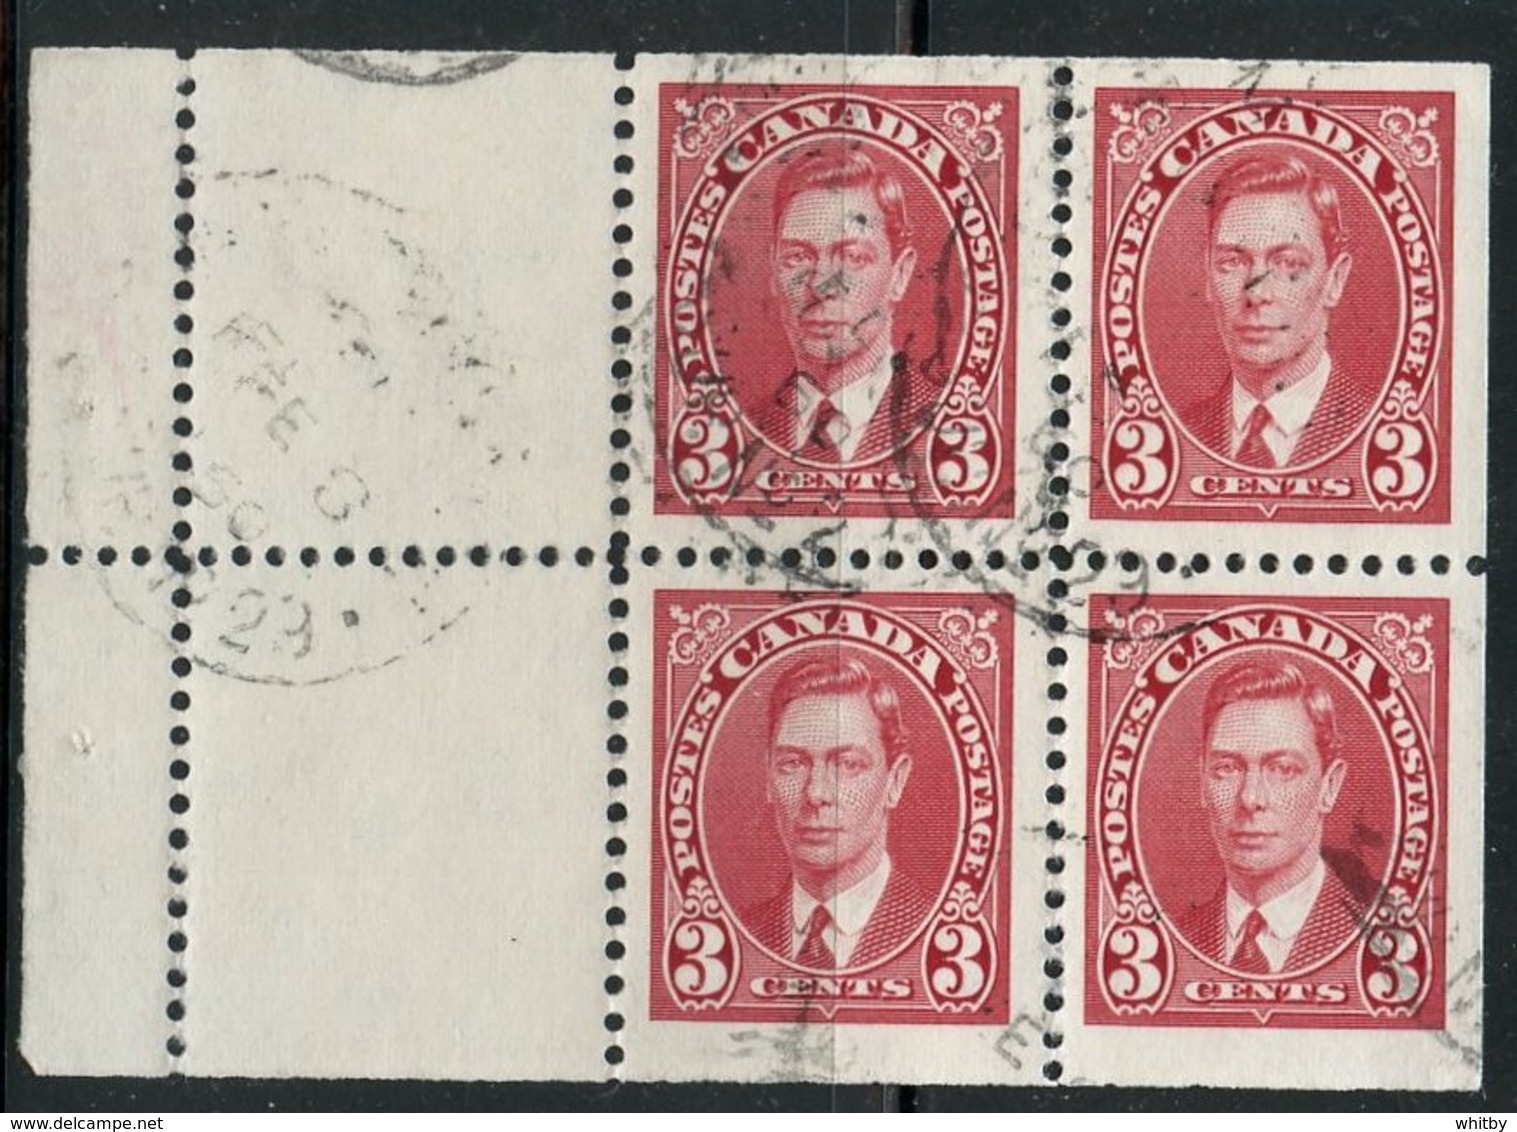 1937 3 Cent King George VI Mufti Issue #233a  Booklet Pane - Used Stamps